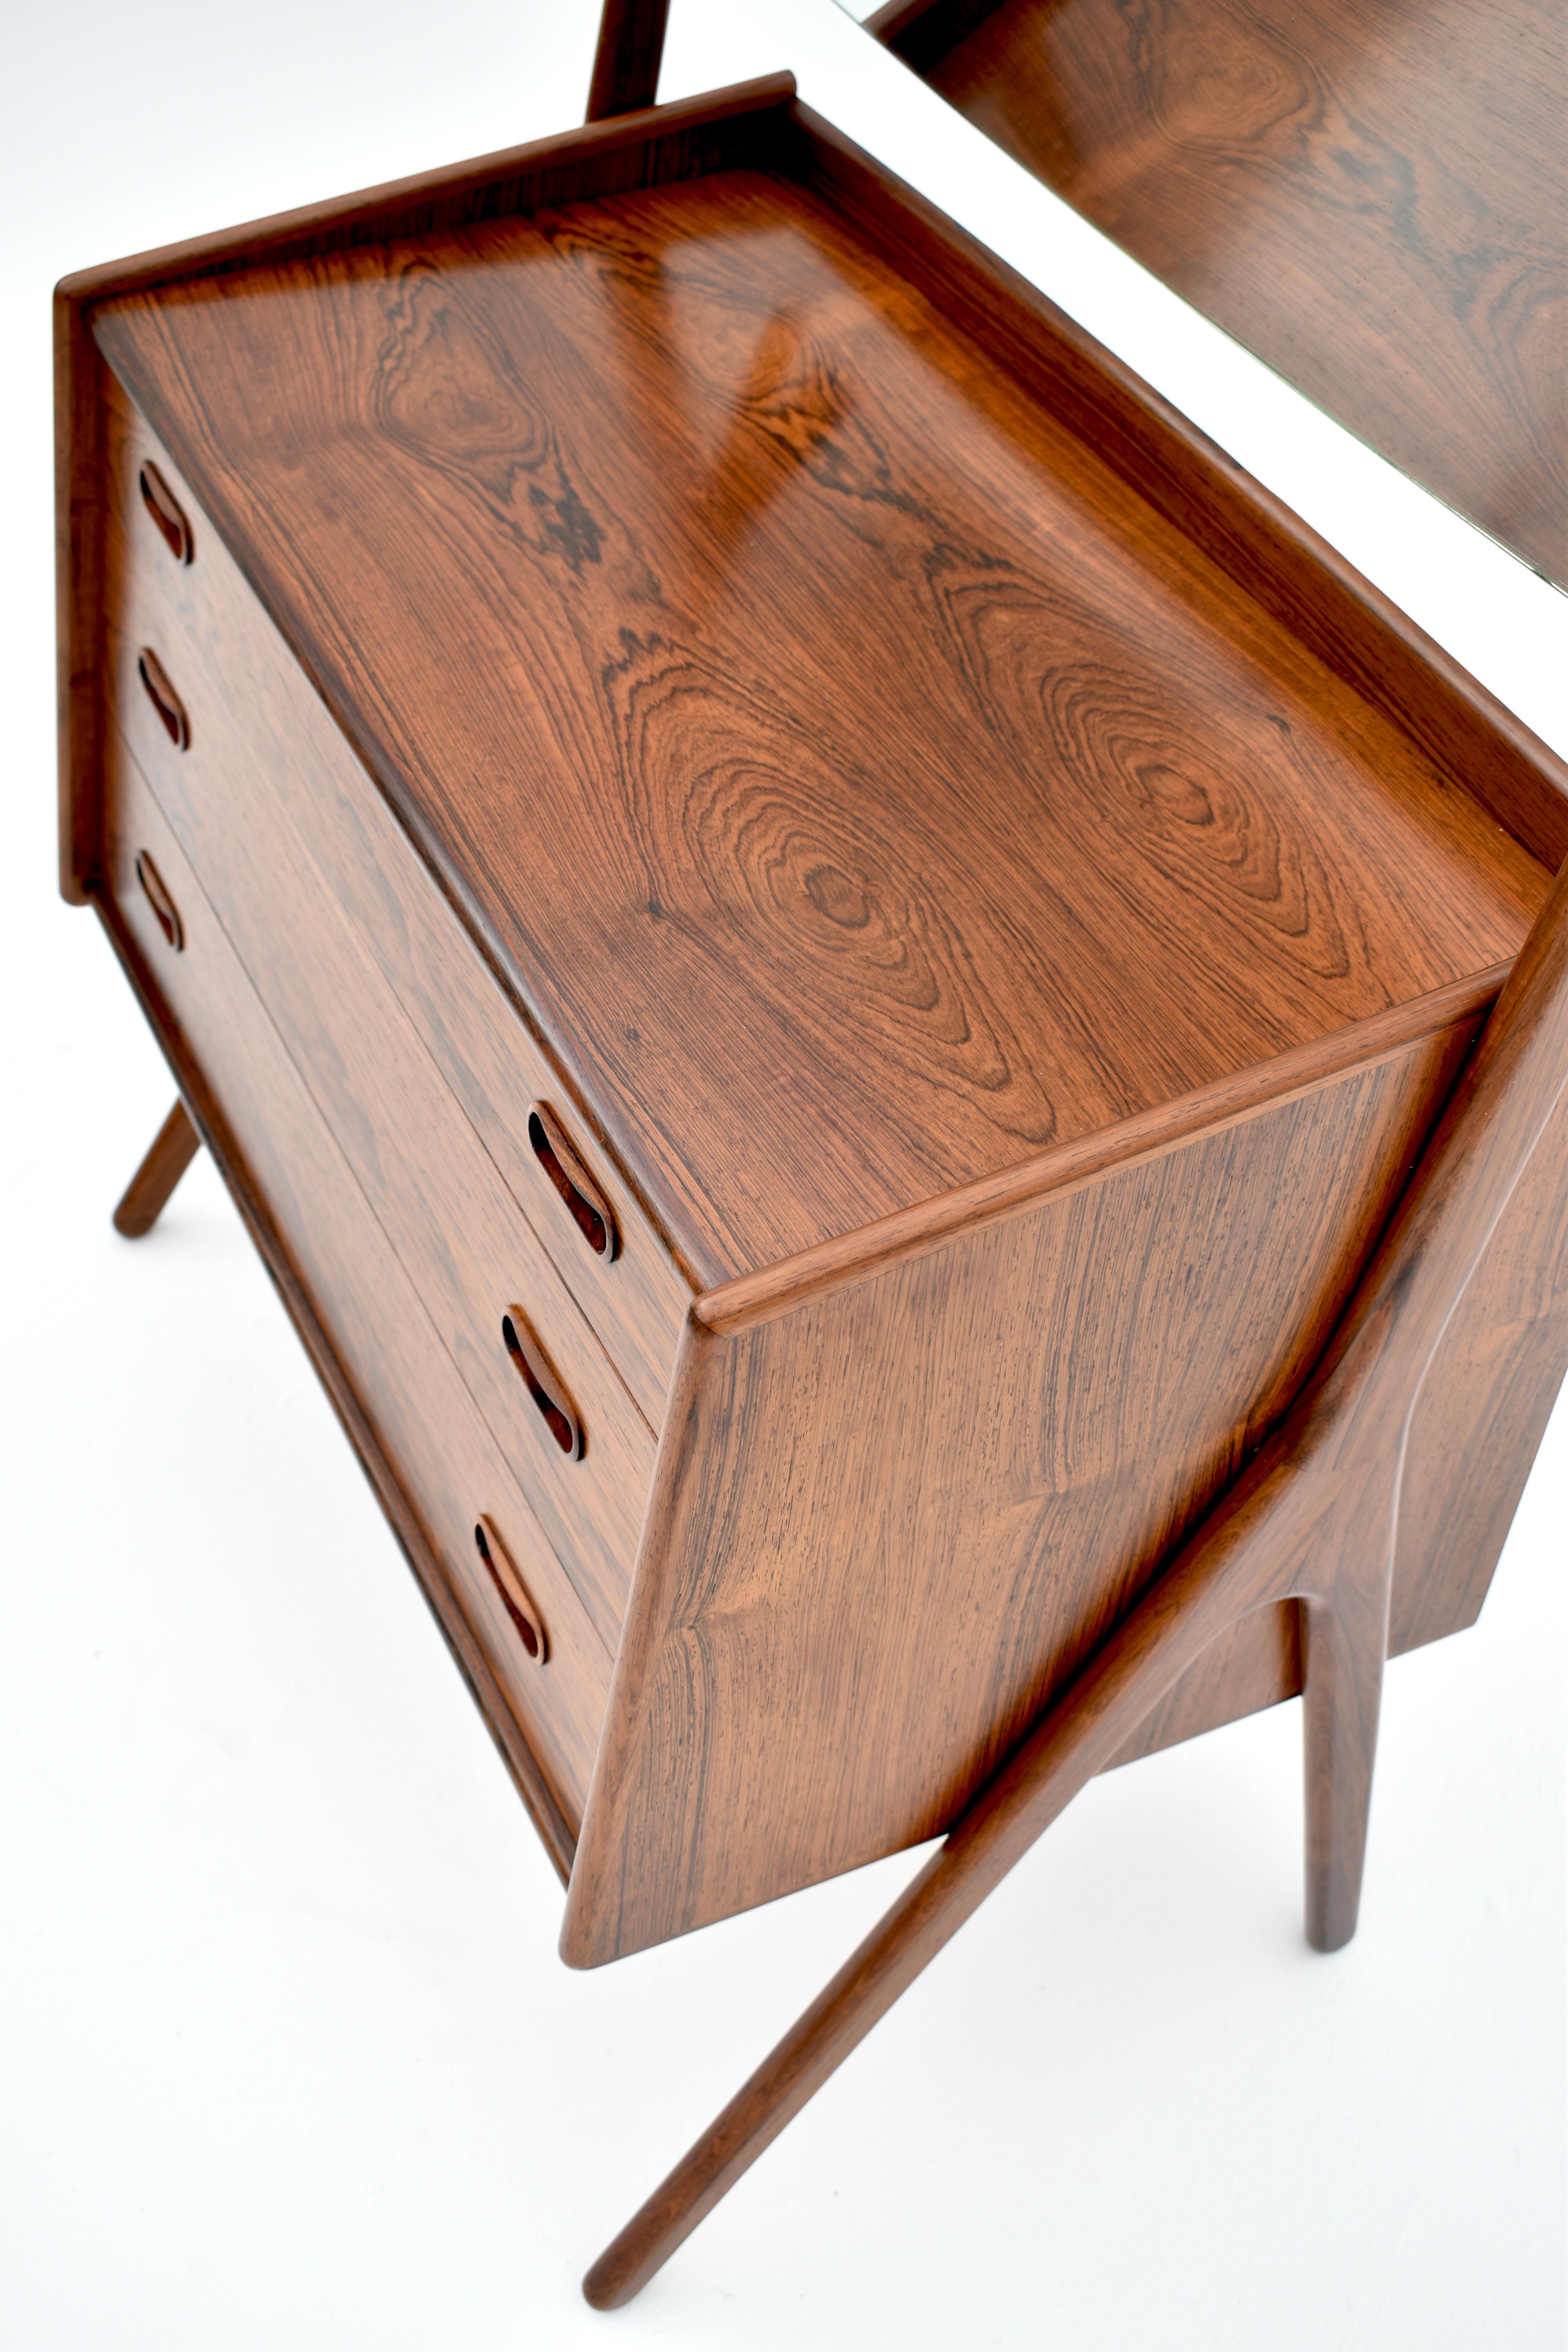 An extremely rare (we have never seen another example offered for sale anywhere) Brazilian rosewood cabinet designed by Svend Aage Madsen for NB Mobler.

The angular carcass held by highly sculptural scissor legs crafted from solid rosewood. A